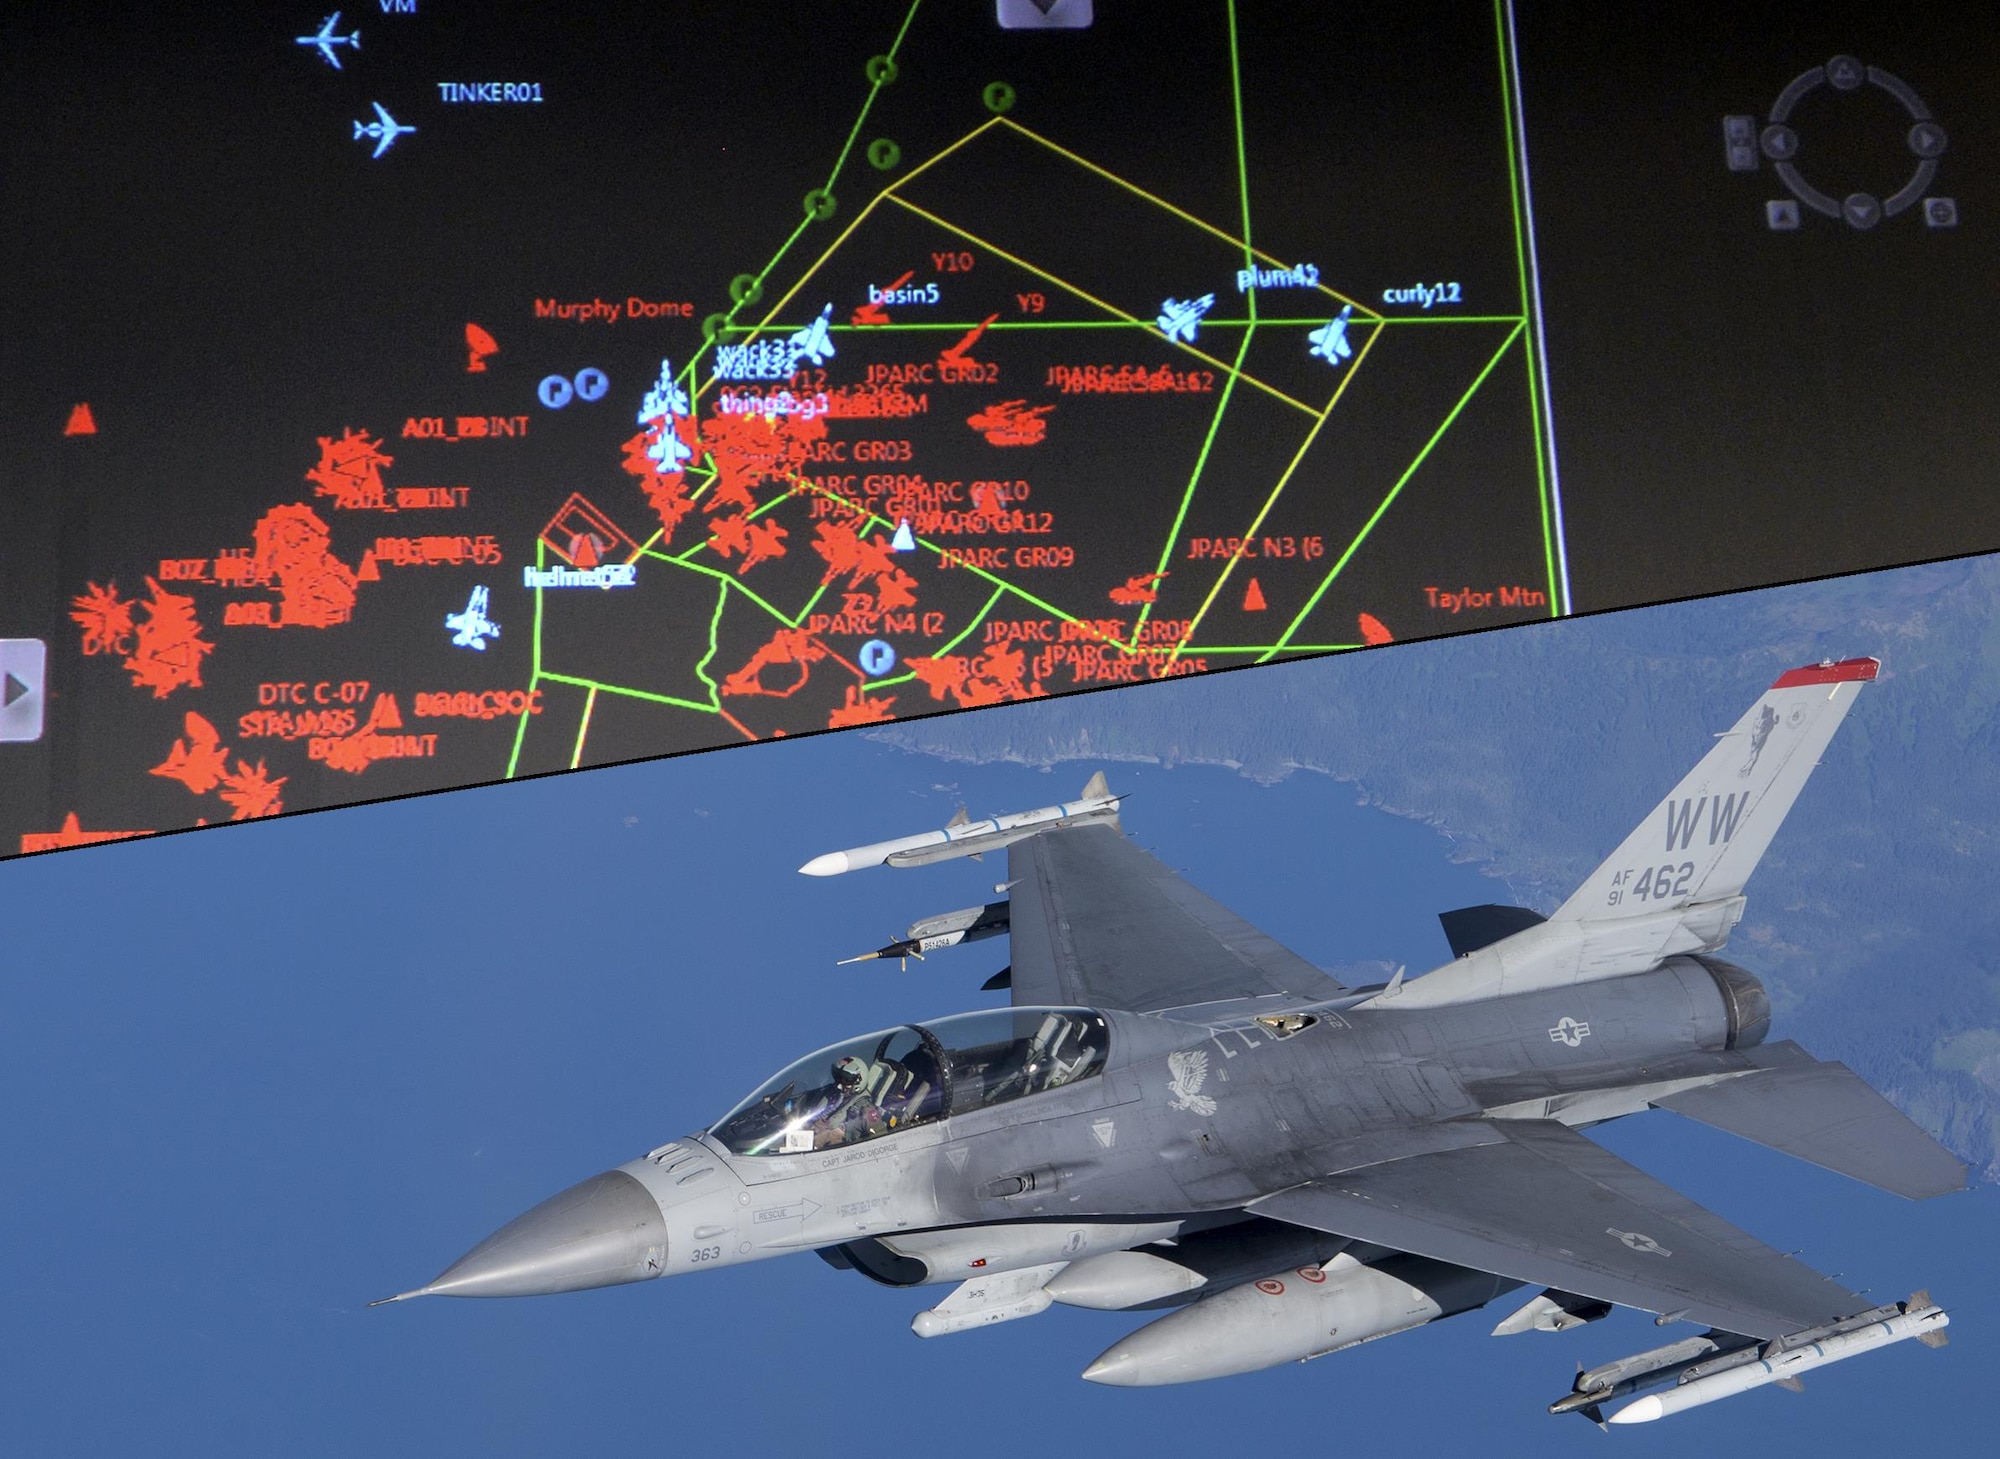 Live, virtual and constructive (LVC) participants from various U.S. military branches are tracked by the 353rd Combat Training Squadron as assets move into place in preparation for an Exercise Northern Edge scenario June 25, 2015. The LVC system enables live participants like this U.S. Air Force F-16 Fighting Falcon deployed to Alaska to directly engage and interact with virtual aviators operating from home station simulators, and contructive computer-generated forces to provide more robust training scenarios. Northern Edge 2015 is Alaska's premier joint training exercise designed to practice operations, tactics, techniques and procedures as well as enhance interoperability among thousands of Airmen, Soldiers, Sailors, Marines and Coast Guardsmen from active duty, reserve and National Guard units. (U.S. Air Force photo illustration by Master Sgt. Karen J. Tomasik/Released)